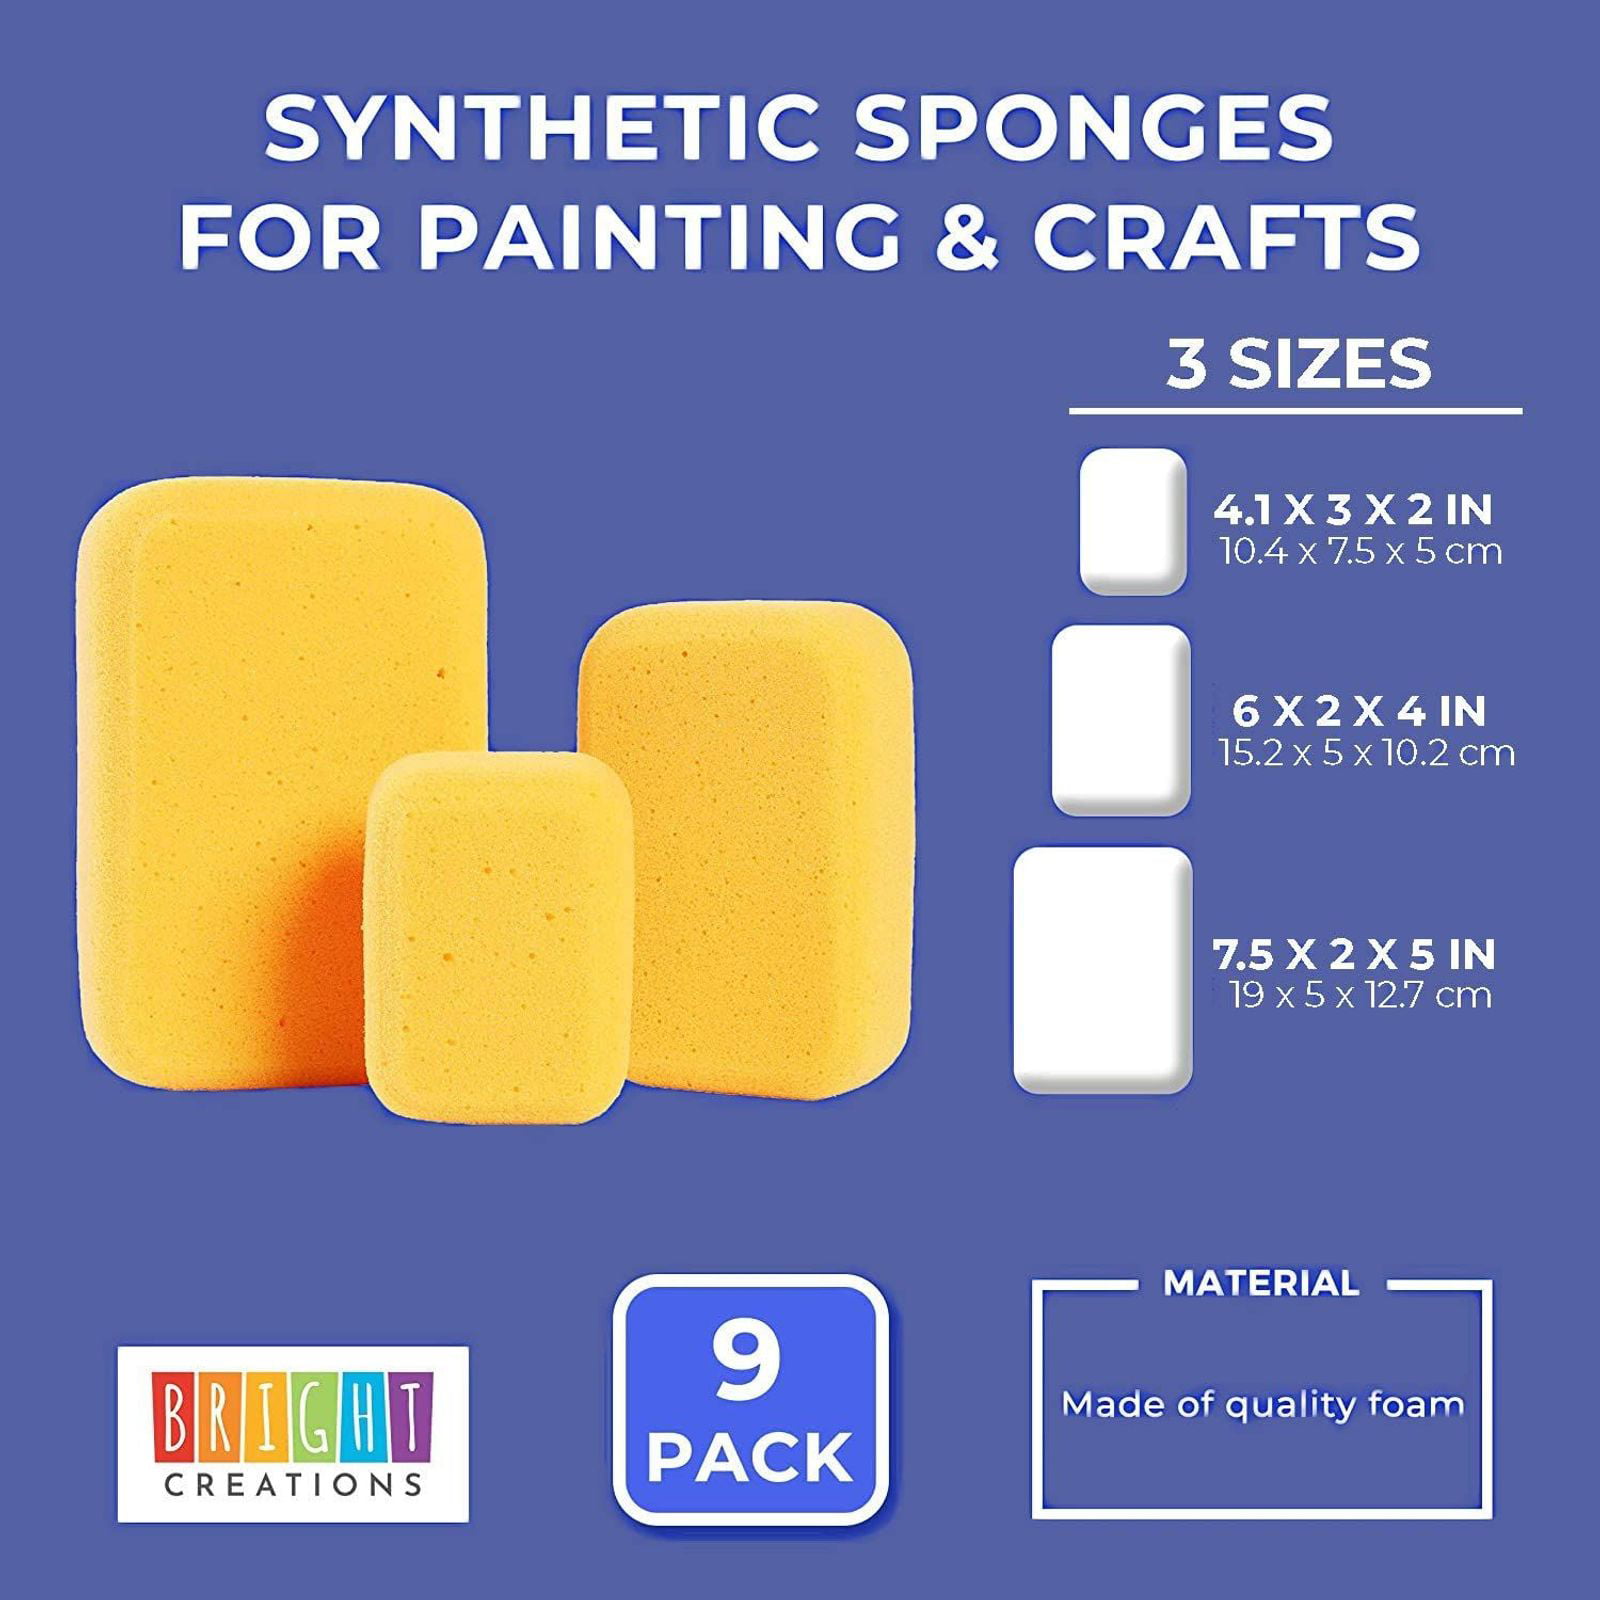 Synthetic Sponges for Painting & Crafts 3 Sizes, Light Orange, 9 Pack 